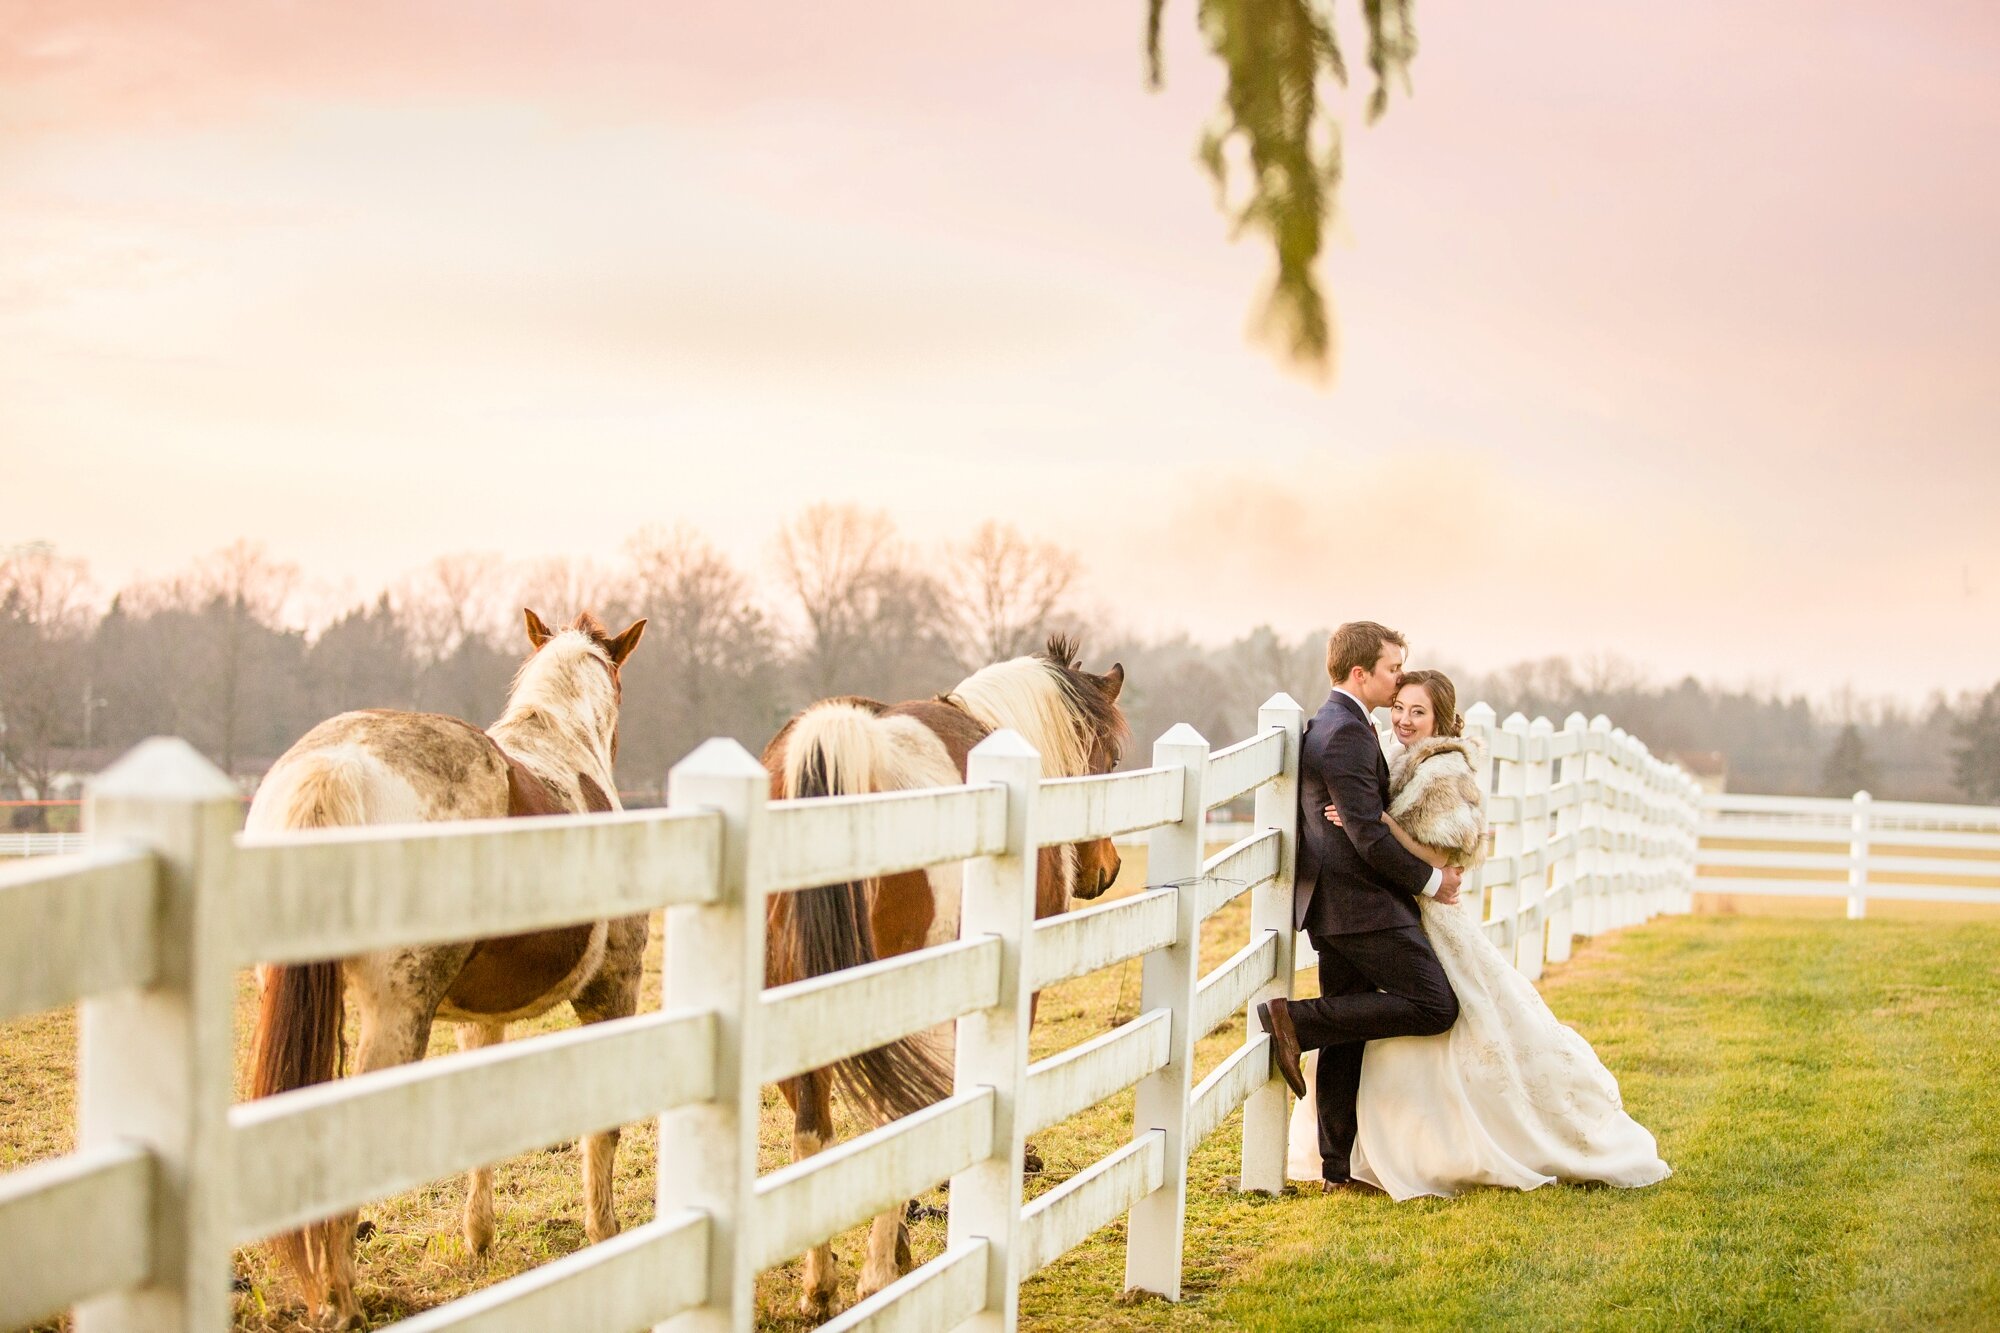  And last but not least, a January wedding with one of the most beautiful sunsets I’ve seen! 